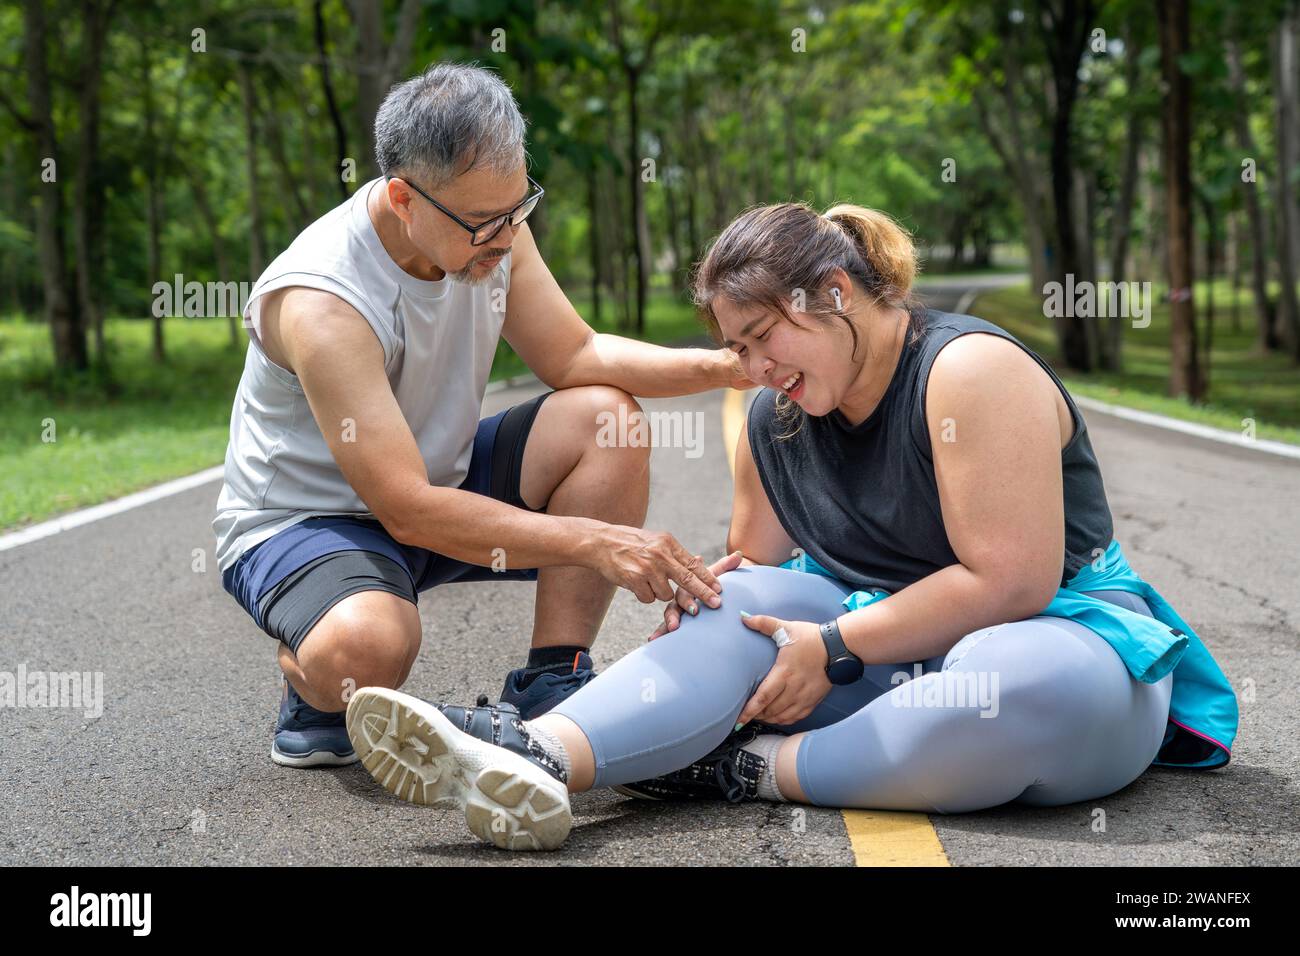 Overweight young woman with knee pain sitting on the running track at local park with both hands grabbing on her trouble knee while a middle age man k Stock Photo